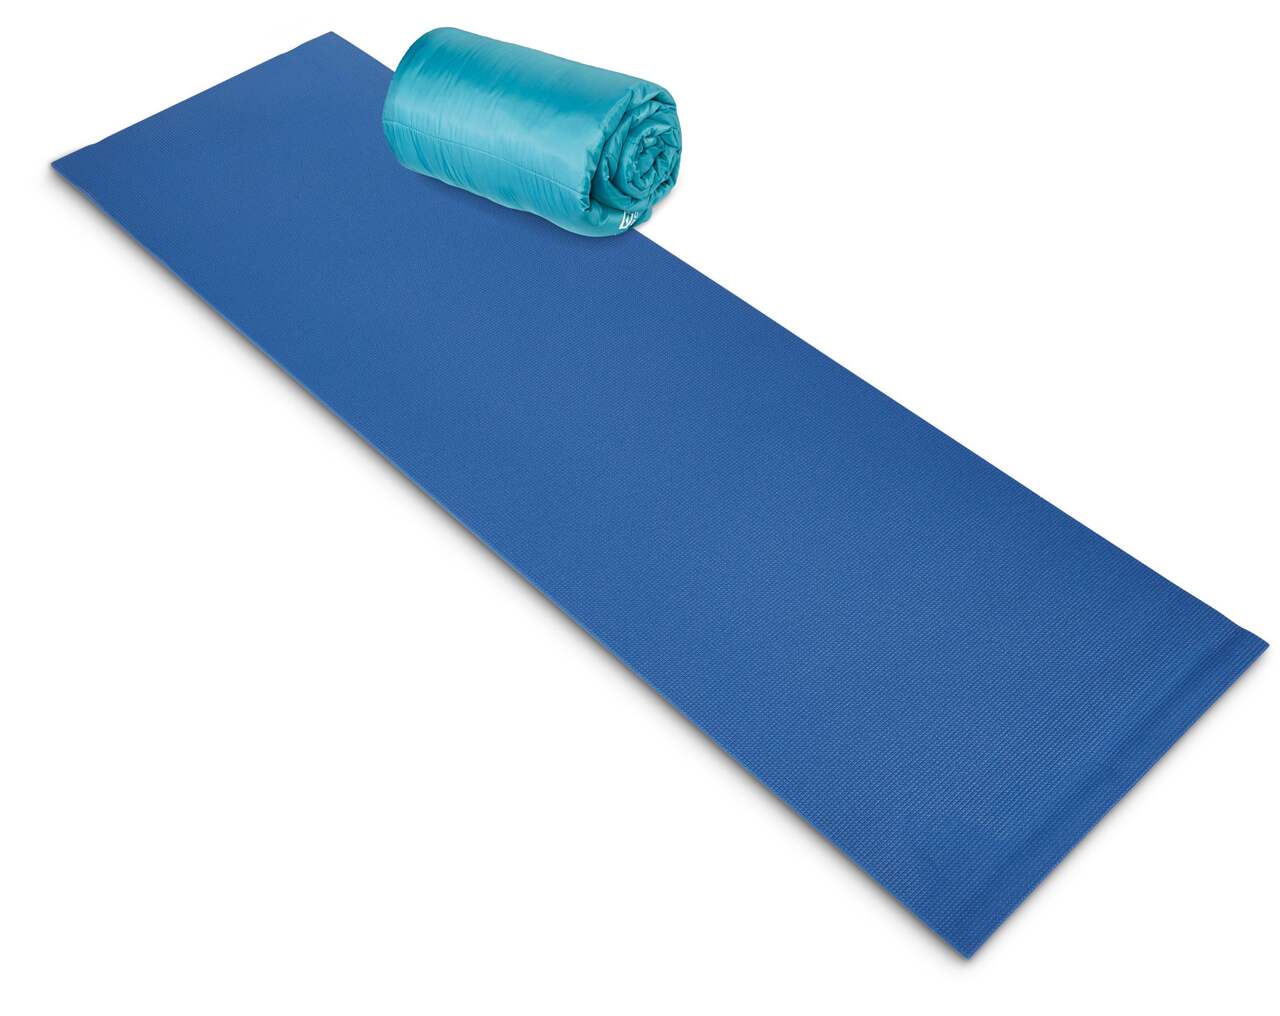 Outbound Single Foam Camping Sleeping Pad/Mat w/ Carry Straps